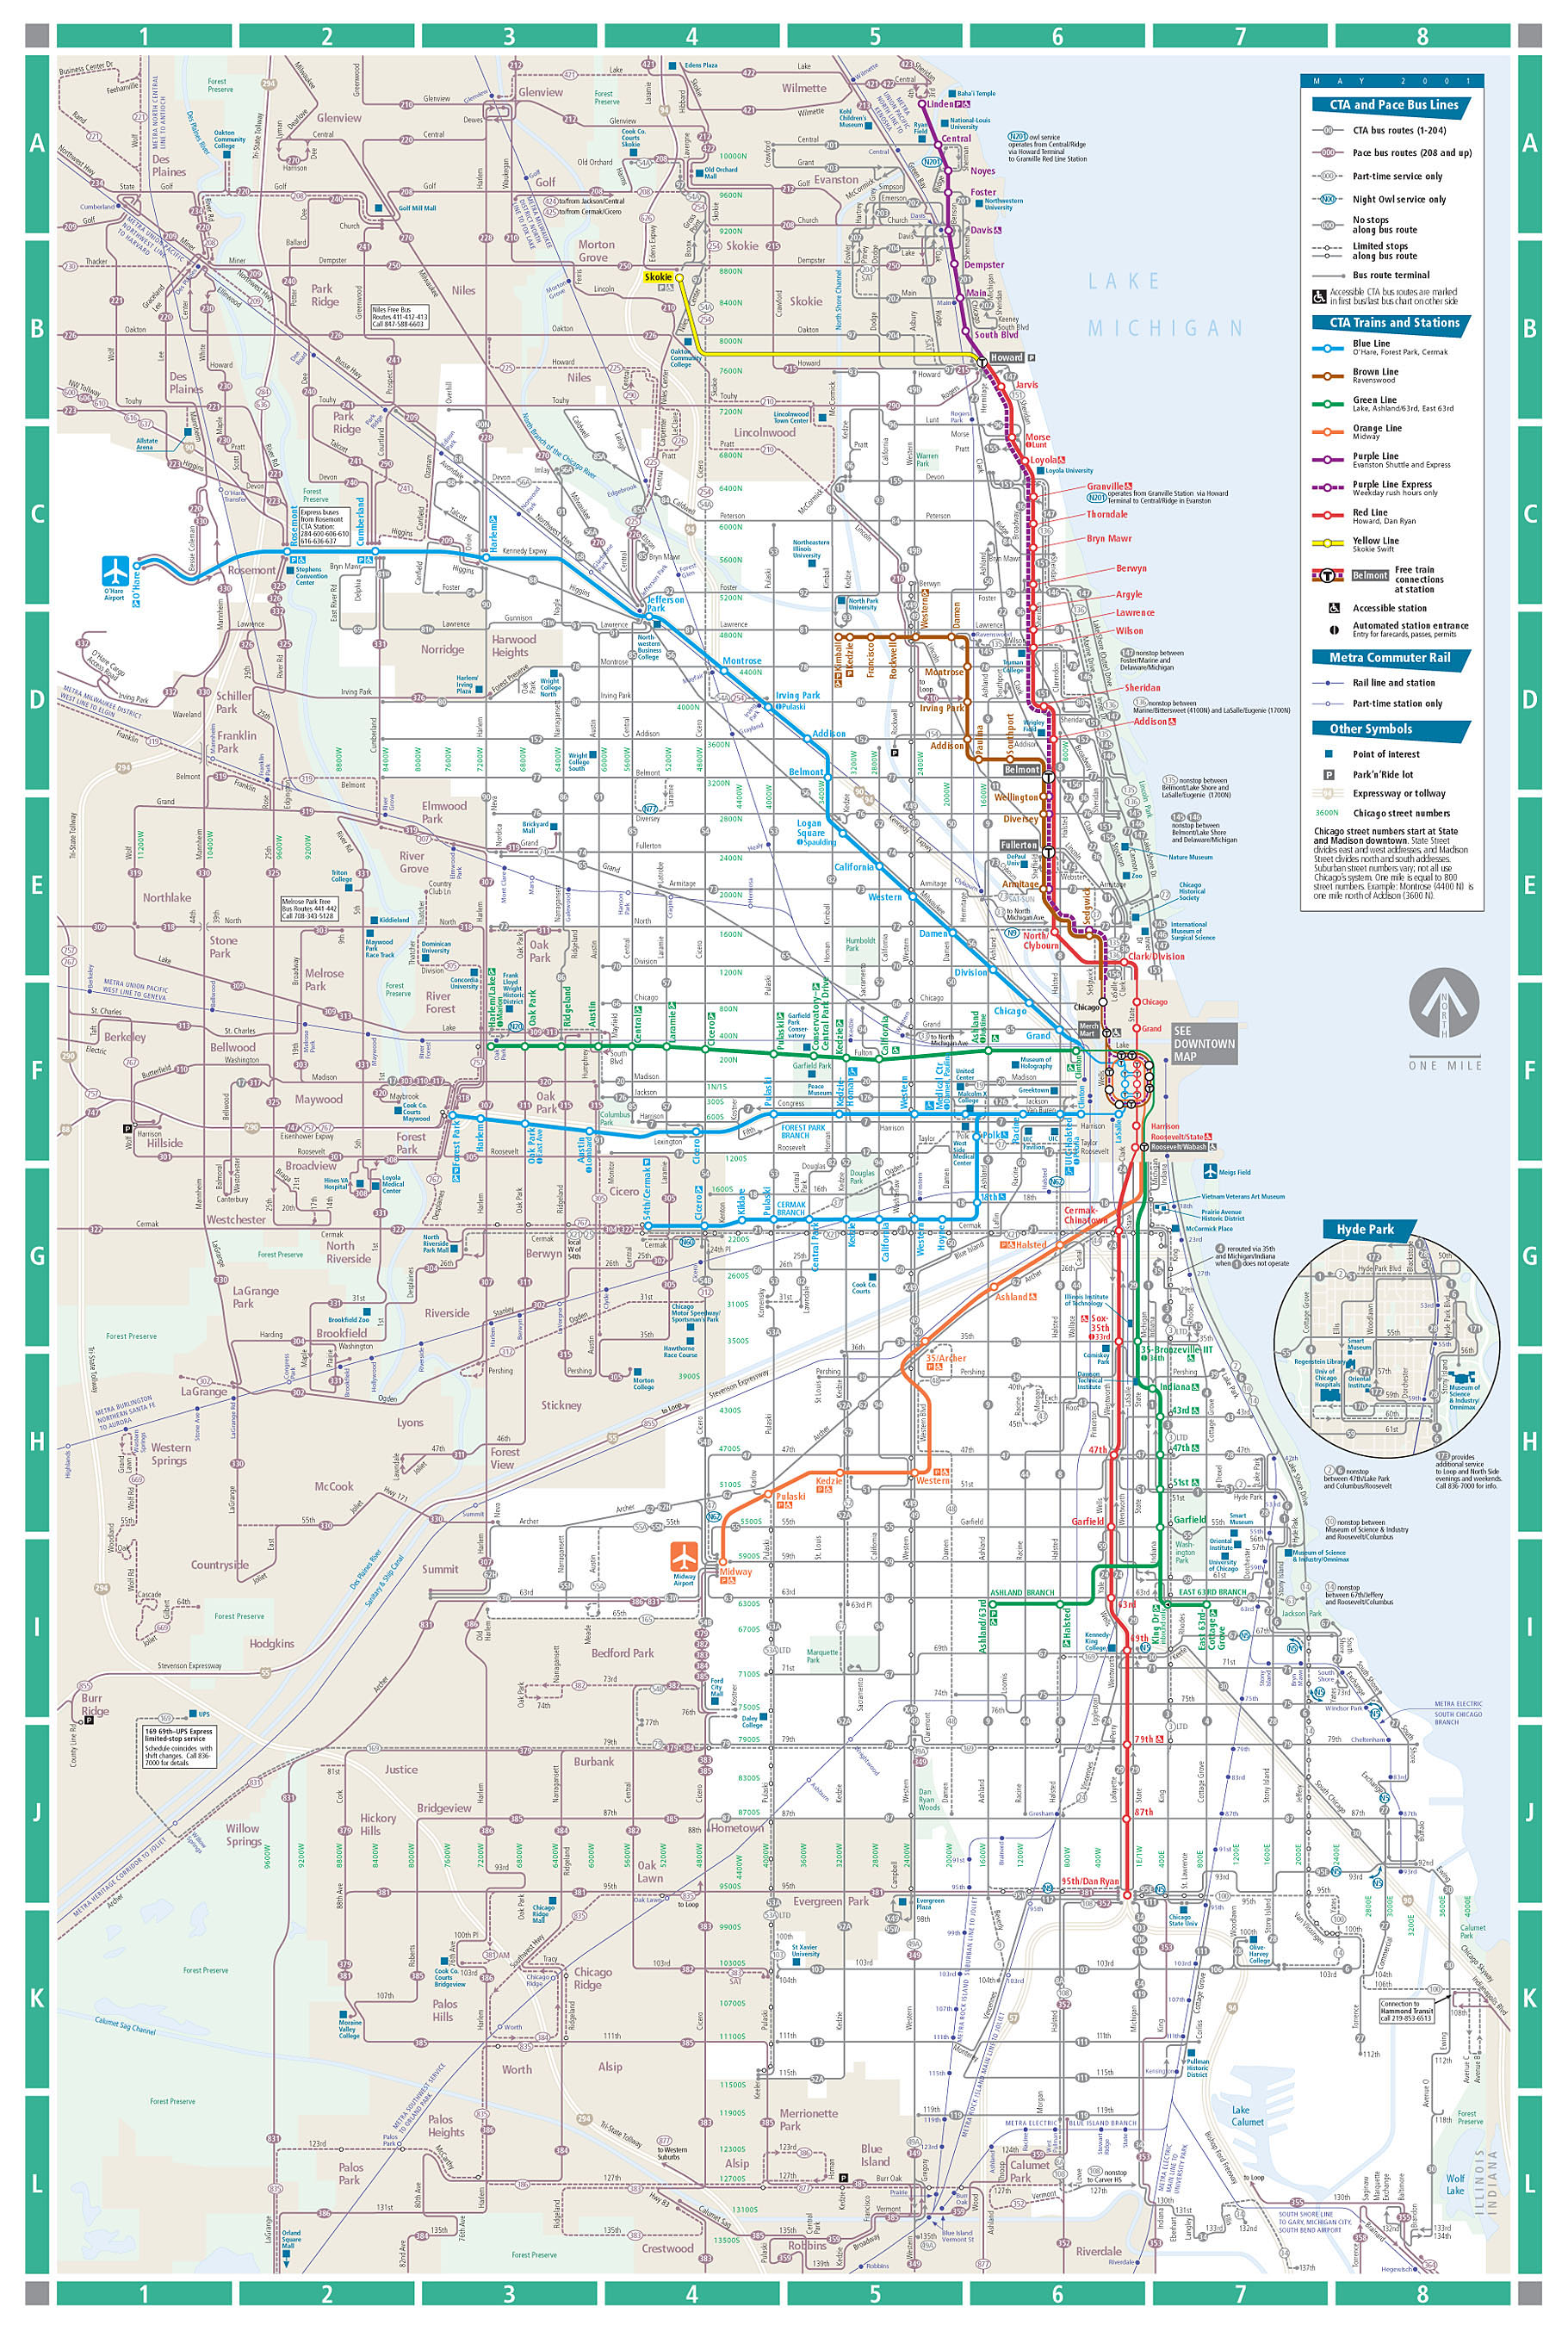 maps-street-map-chicago